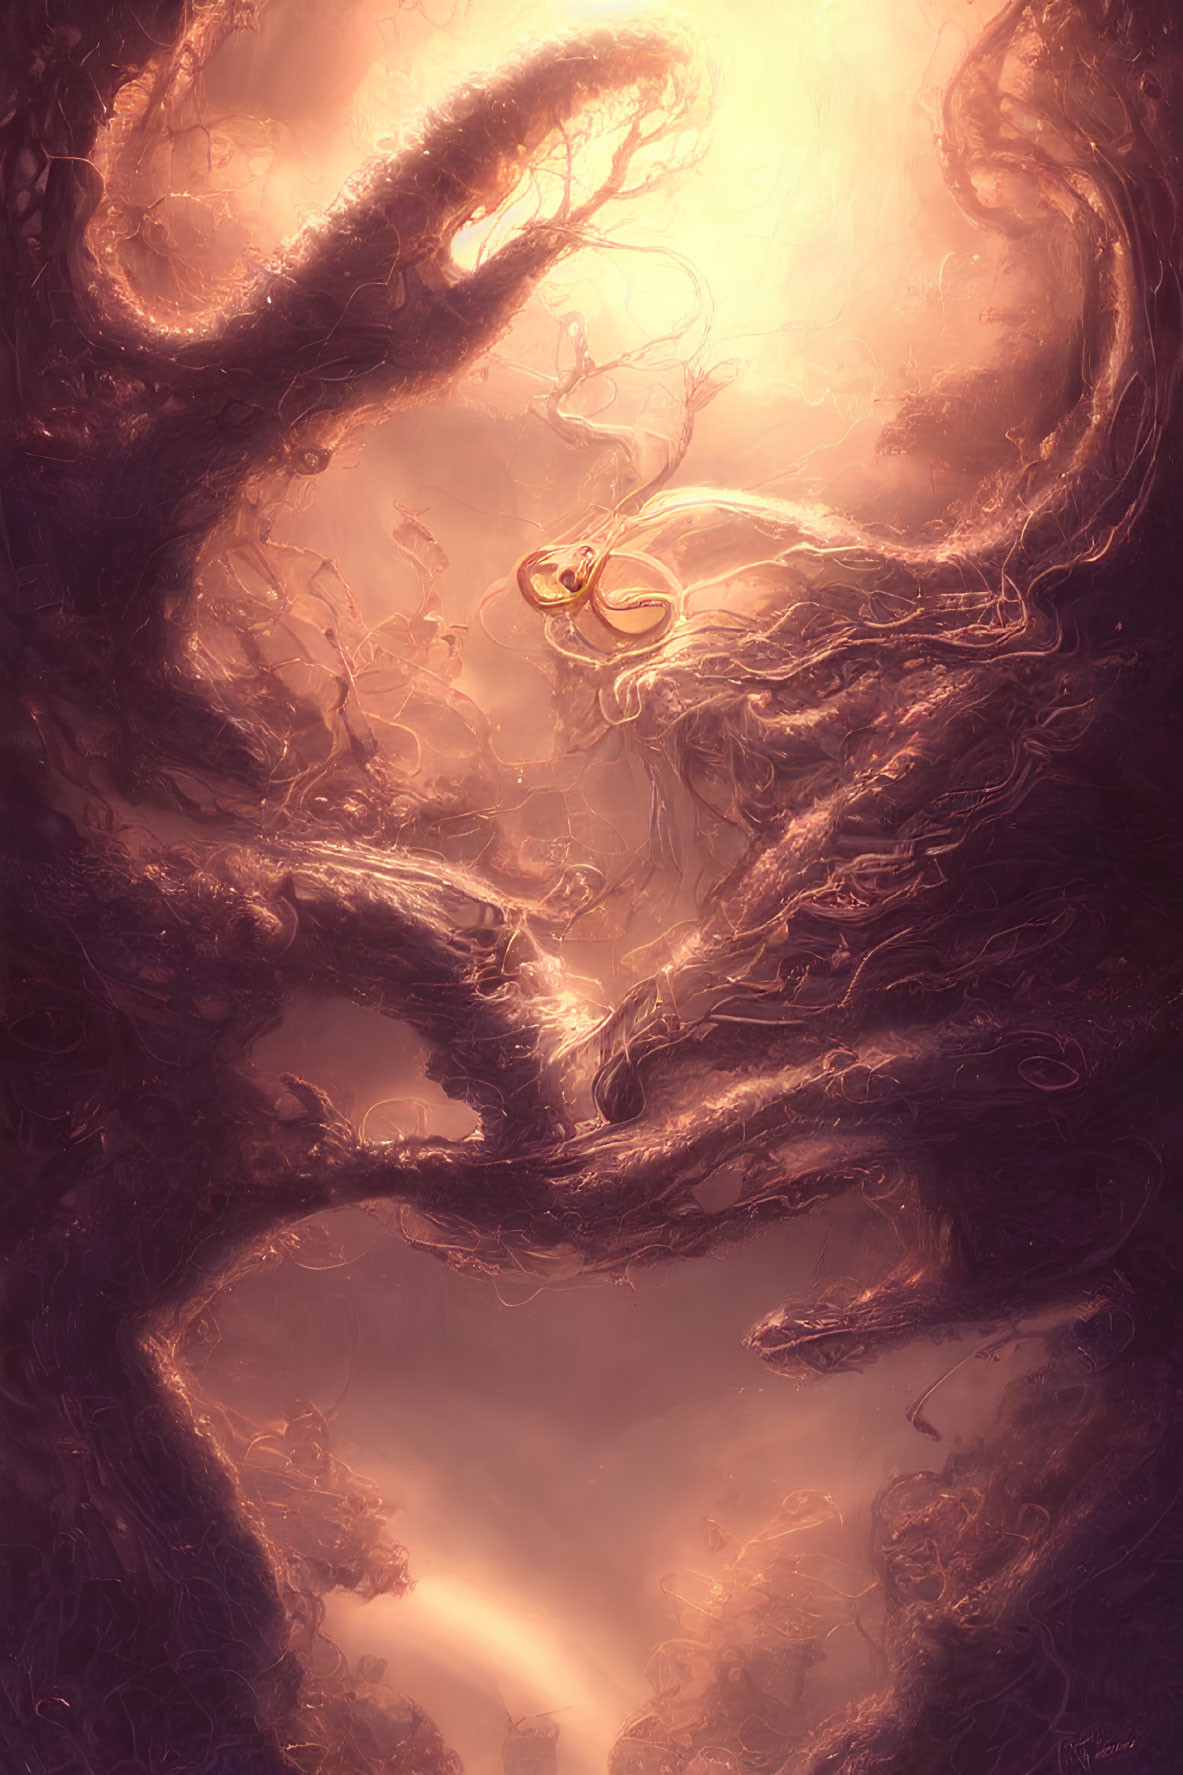 Ethereal tendrils and glowing figure in warm, amber light